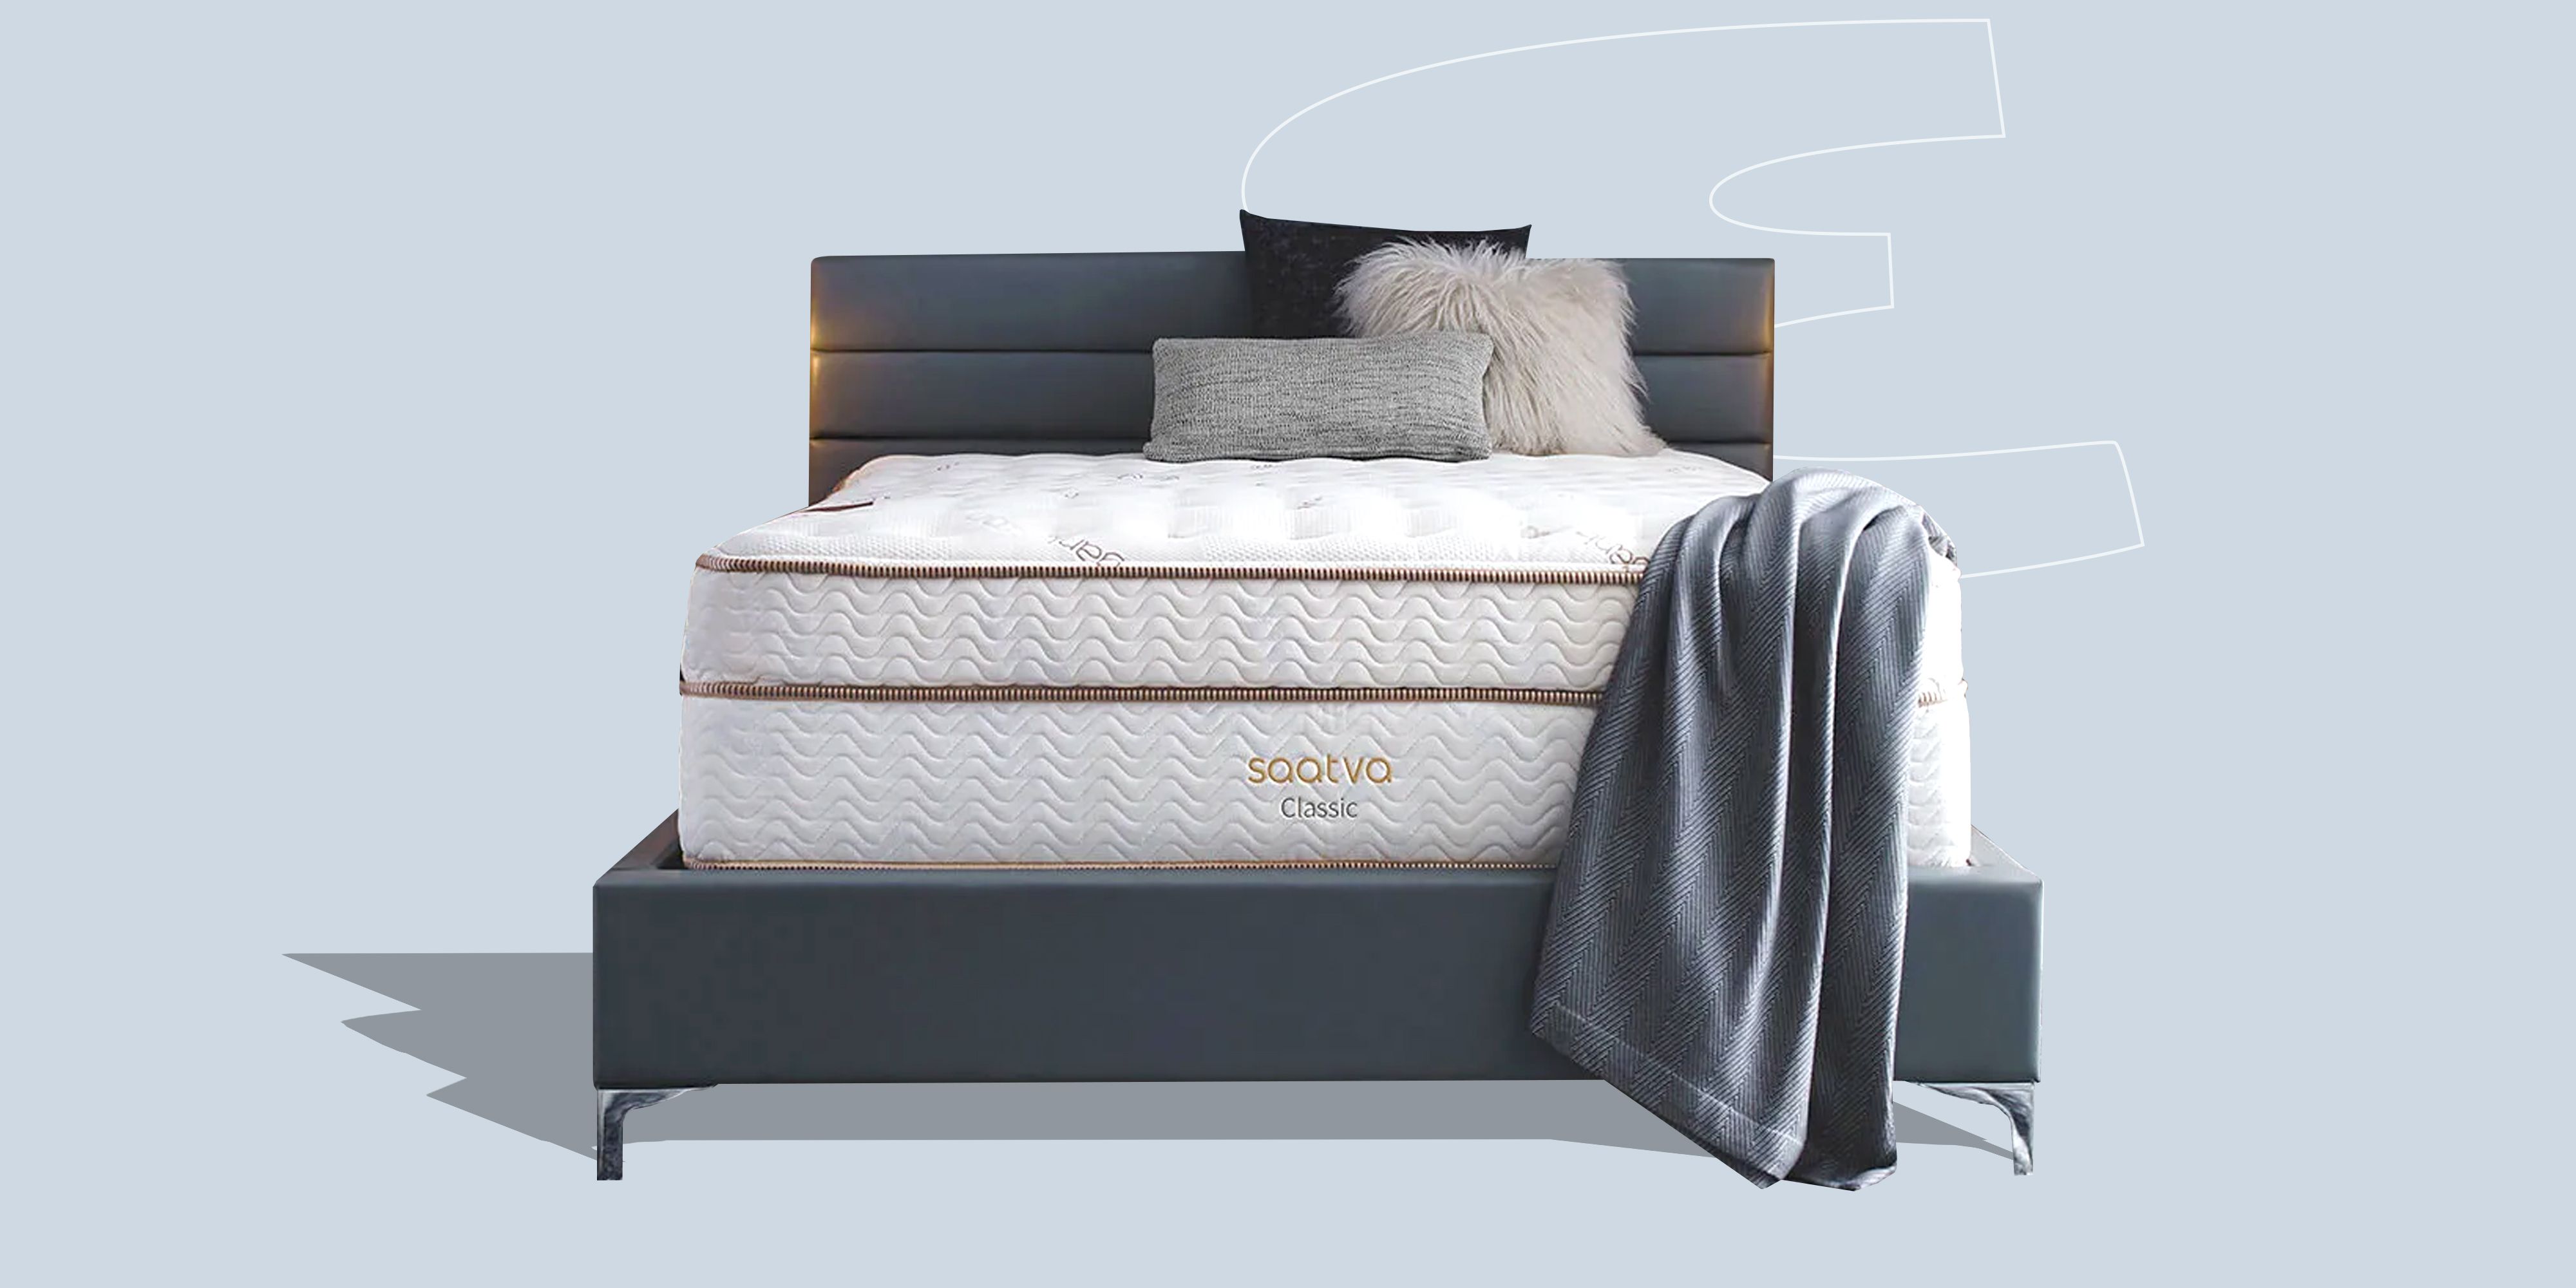 I Assembled the Floyd Storage Bed Frame By Myself in 30 Minutes: Review